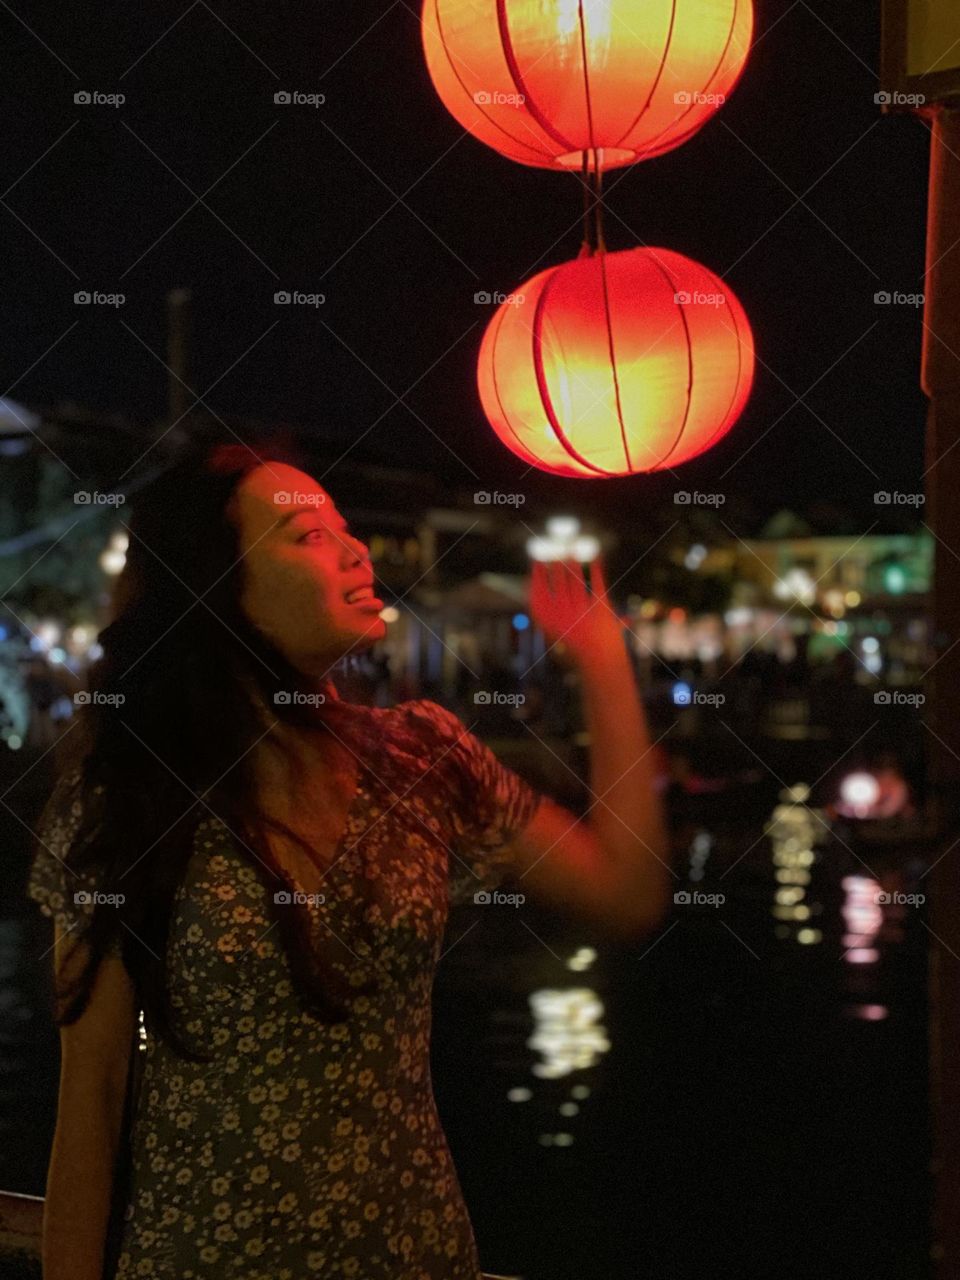 Playing with red lantern (Hoi An Heritage Town, Vietnam)